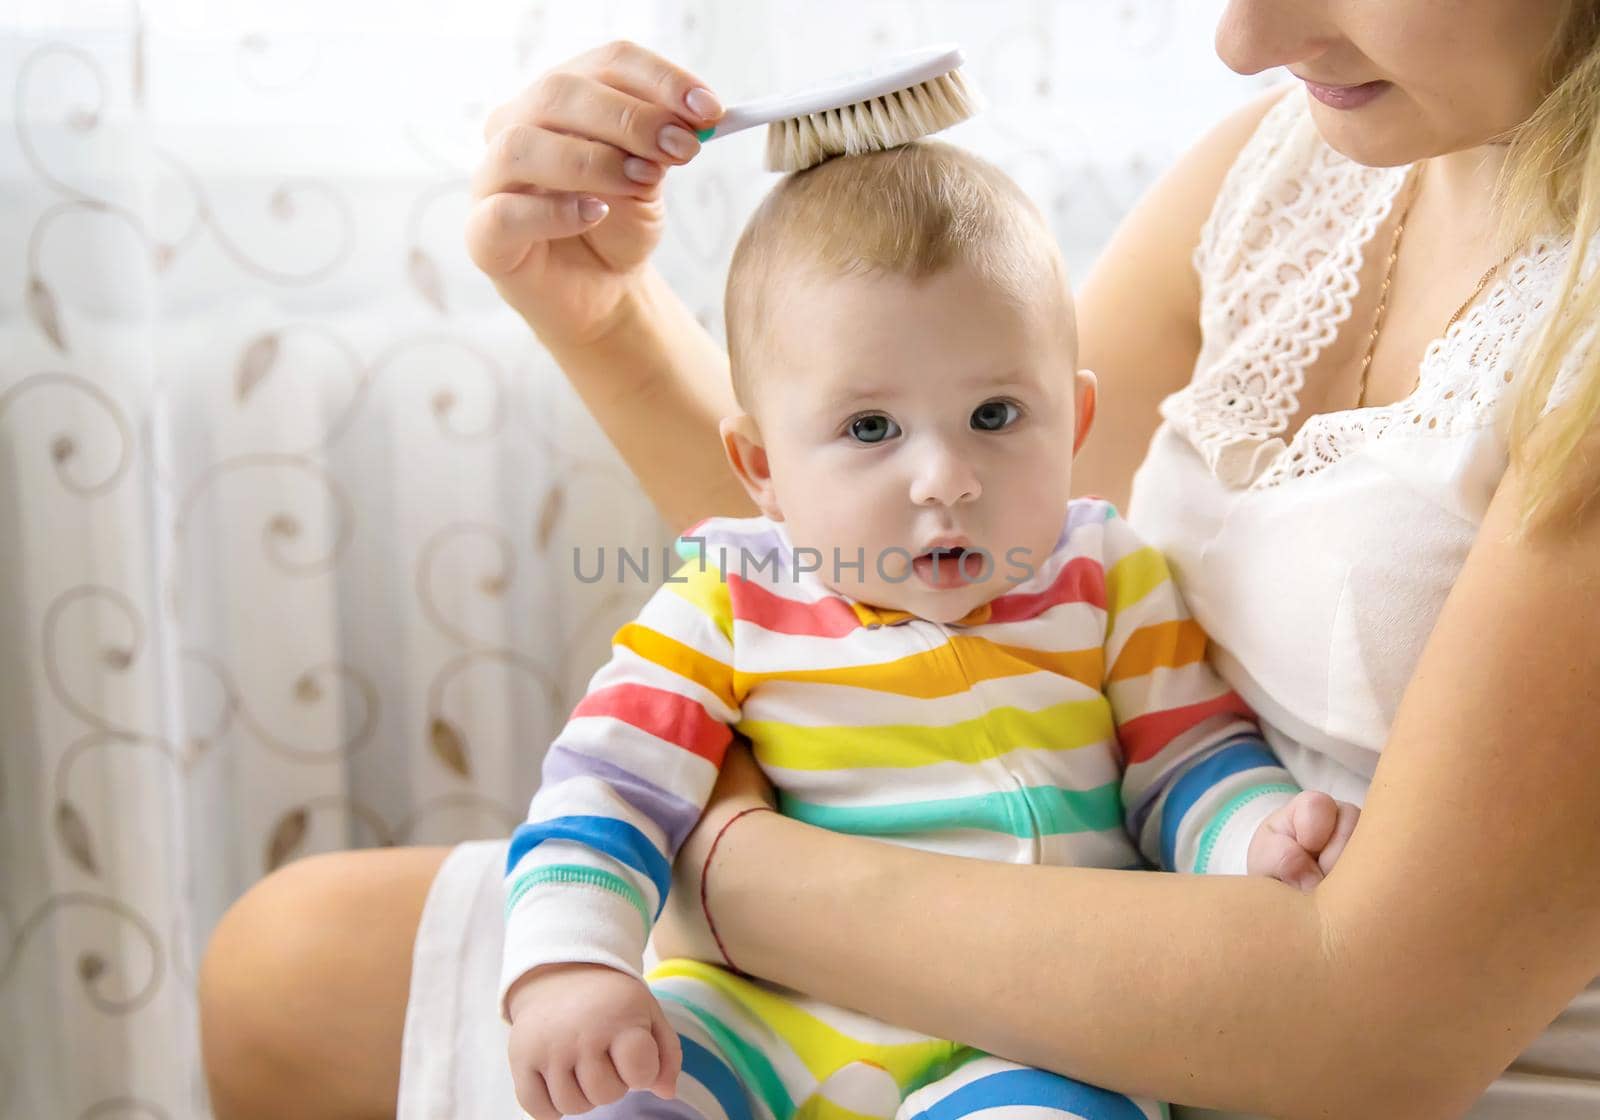 The mother is combing the little baby's hair. Selective focus. People.